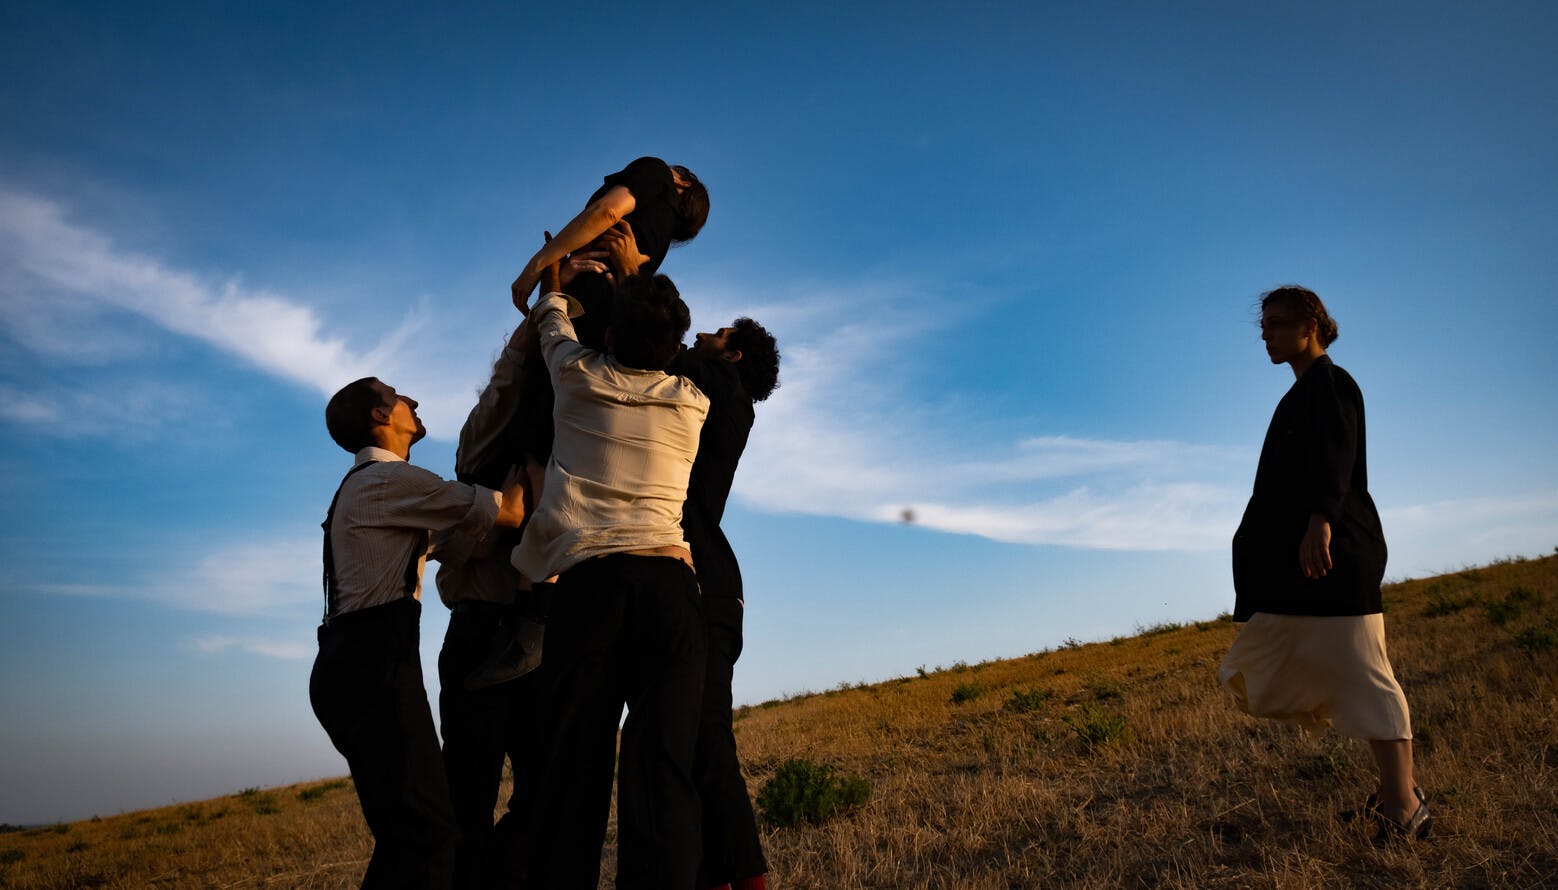 Three men lift a woman vertically up a slope. The two behind support her by the shoulders, while the one in front holds her by the legs. The woman is at dead weight, while a second one looks at the scene on the right.